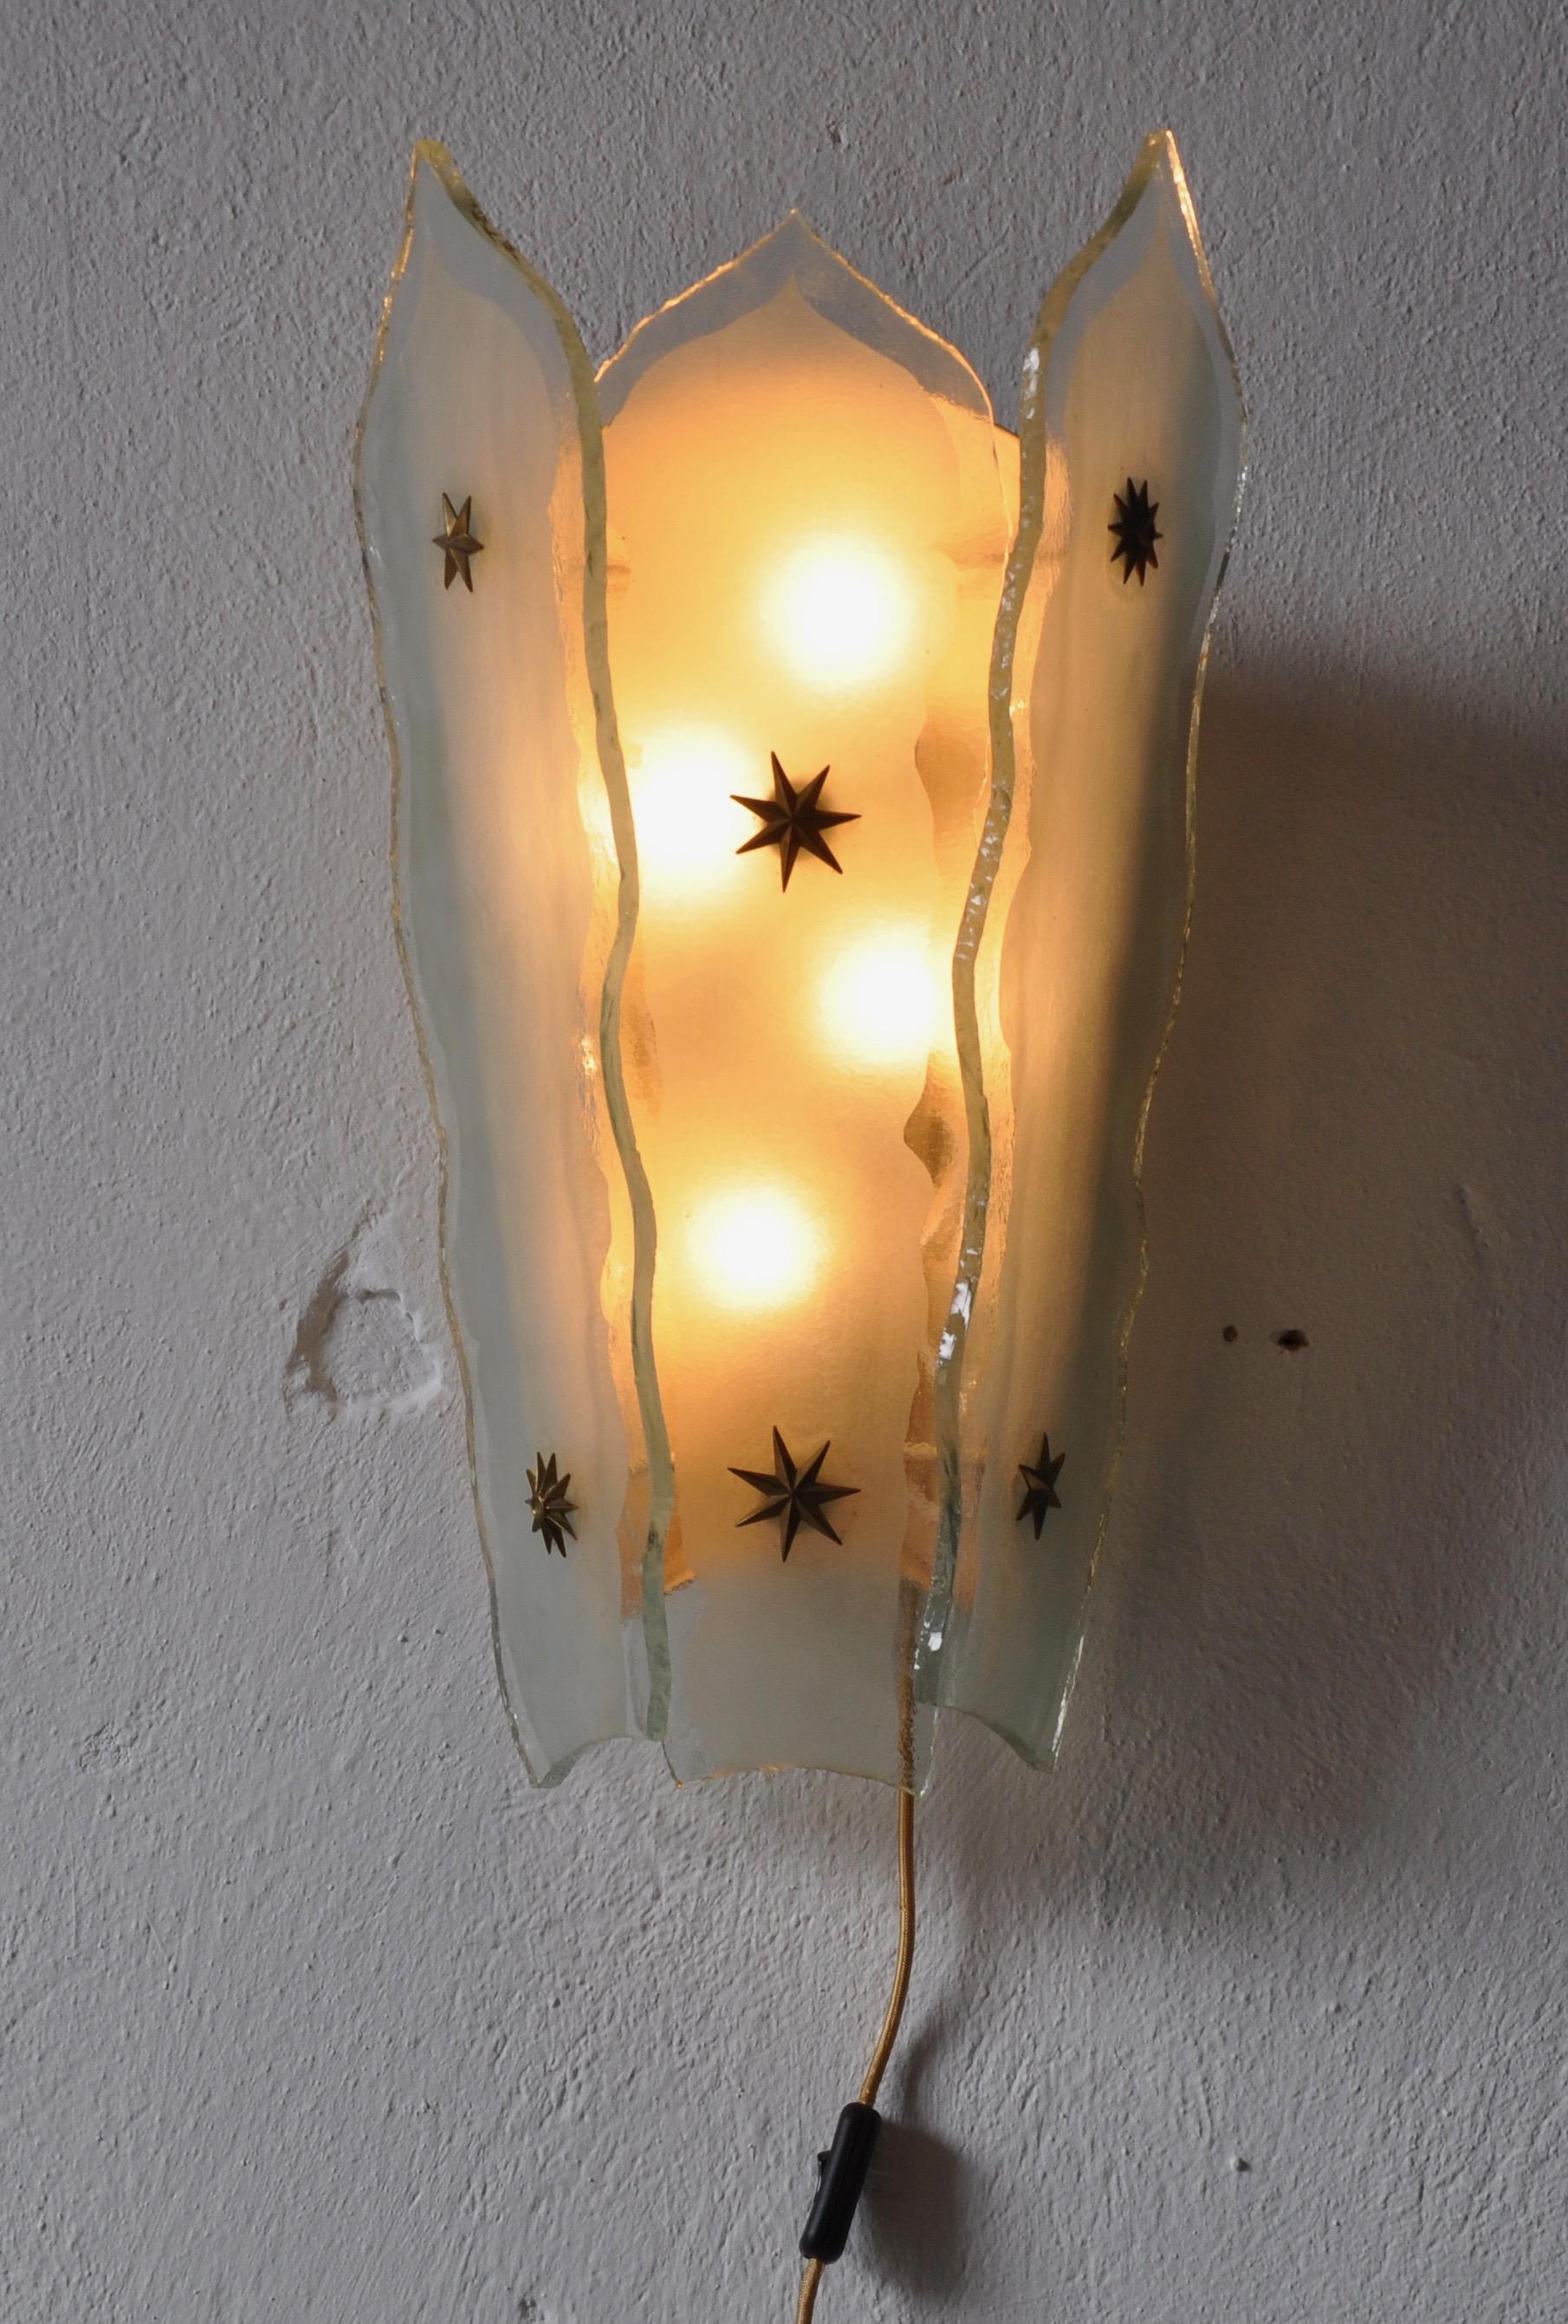 Swedish grace, wall light, 1920s made in Sweden

Slight chip on one glass. 

rewired, works excellent.